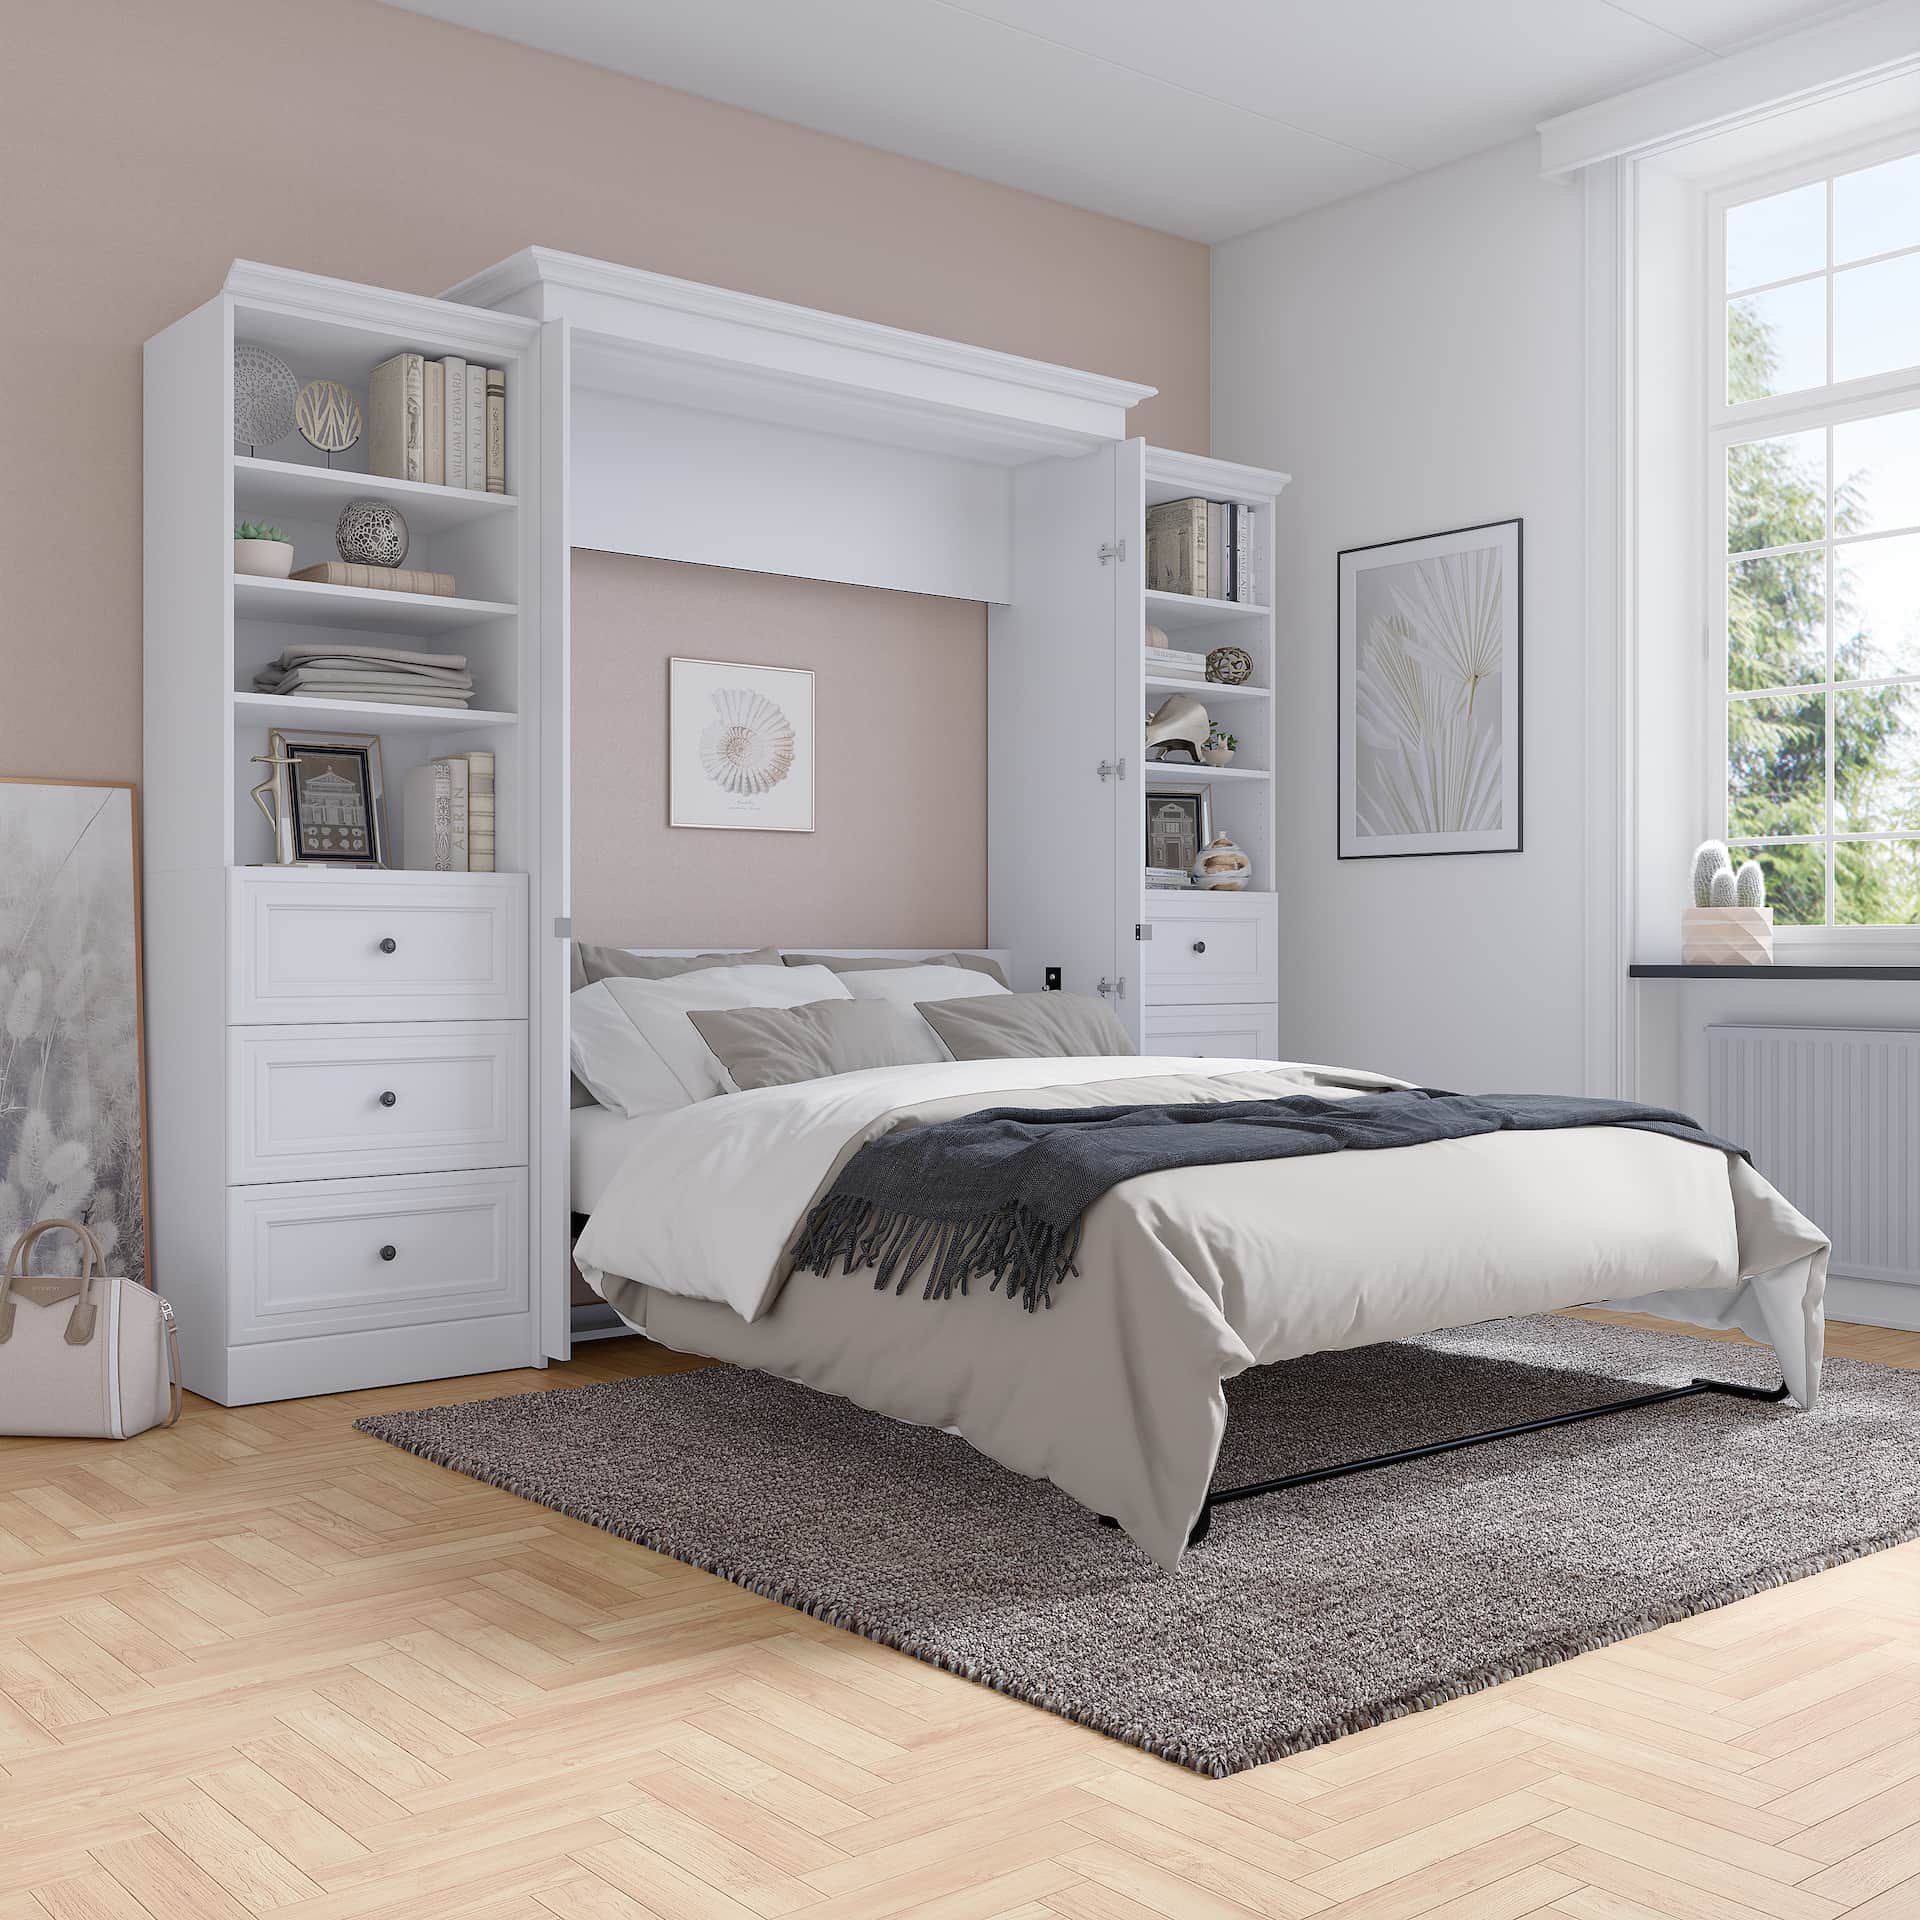 Beautiful Bestar Murphy bed for your new home